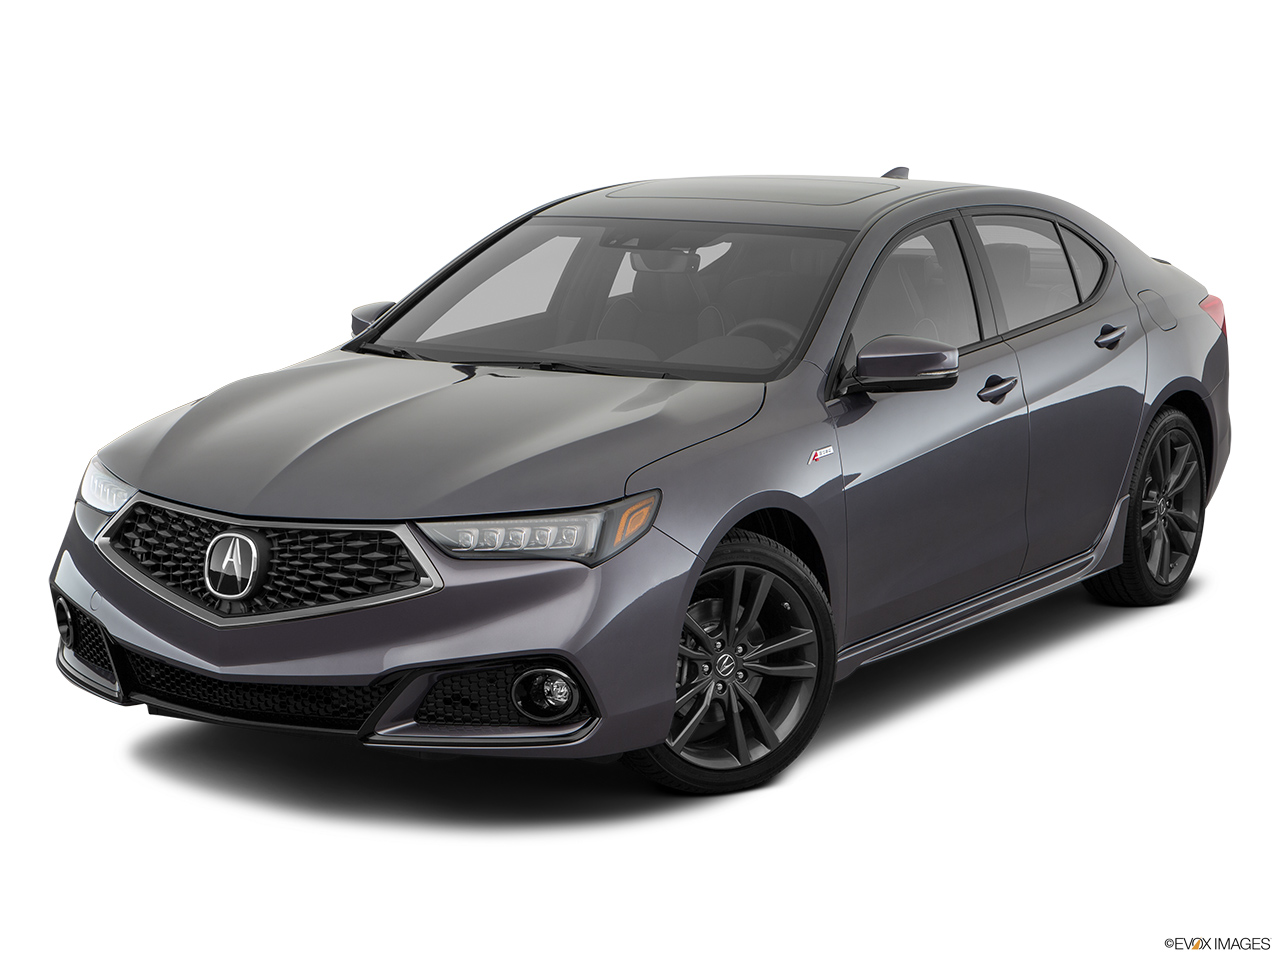 2019 Acura TLX 3.5L Front angle view. 